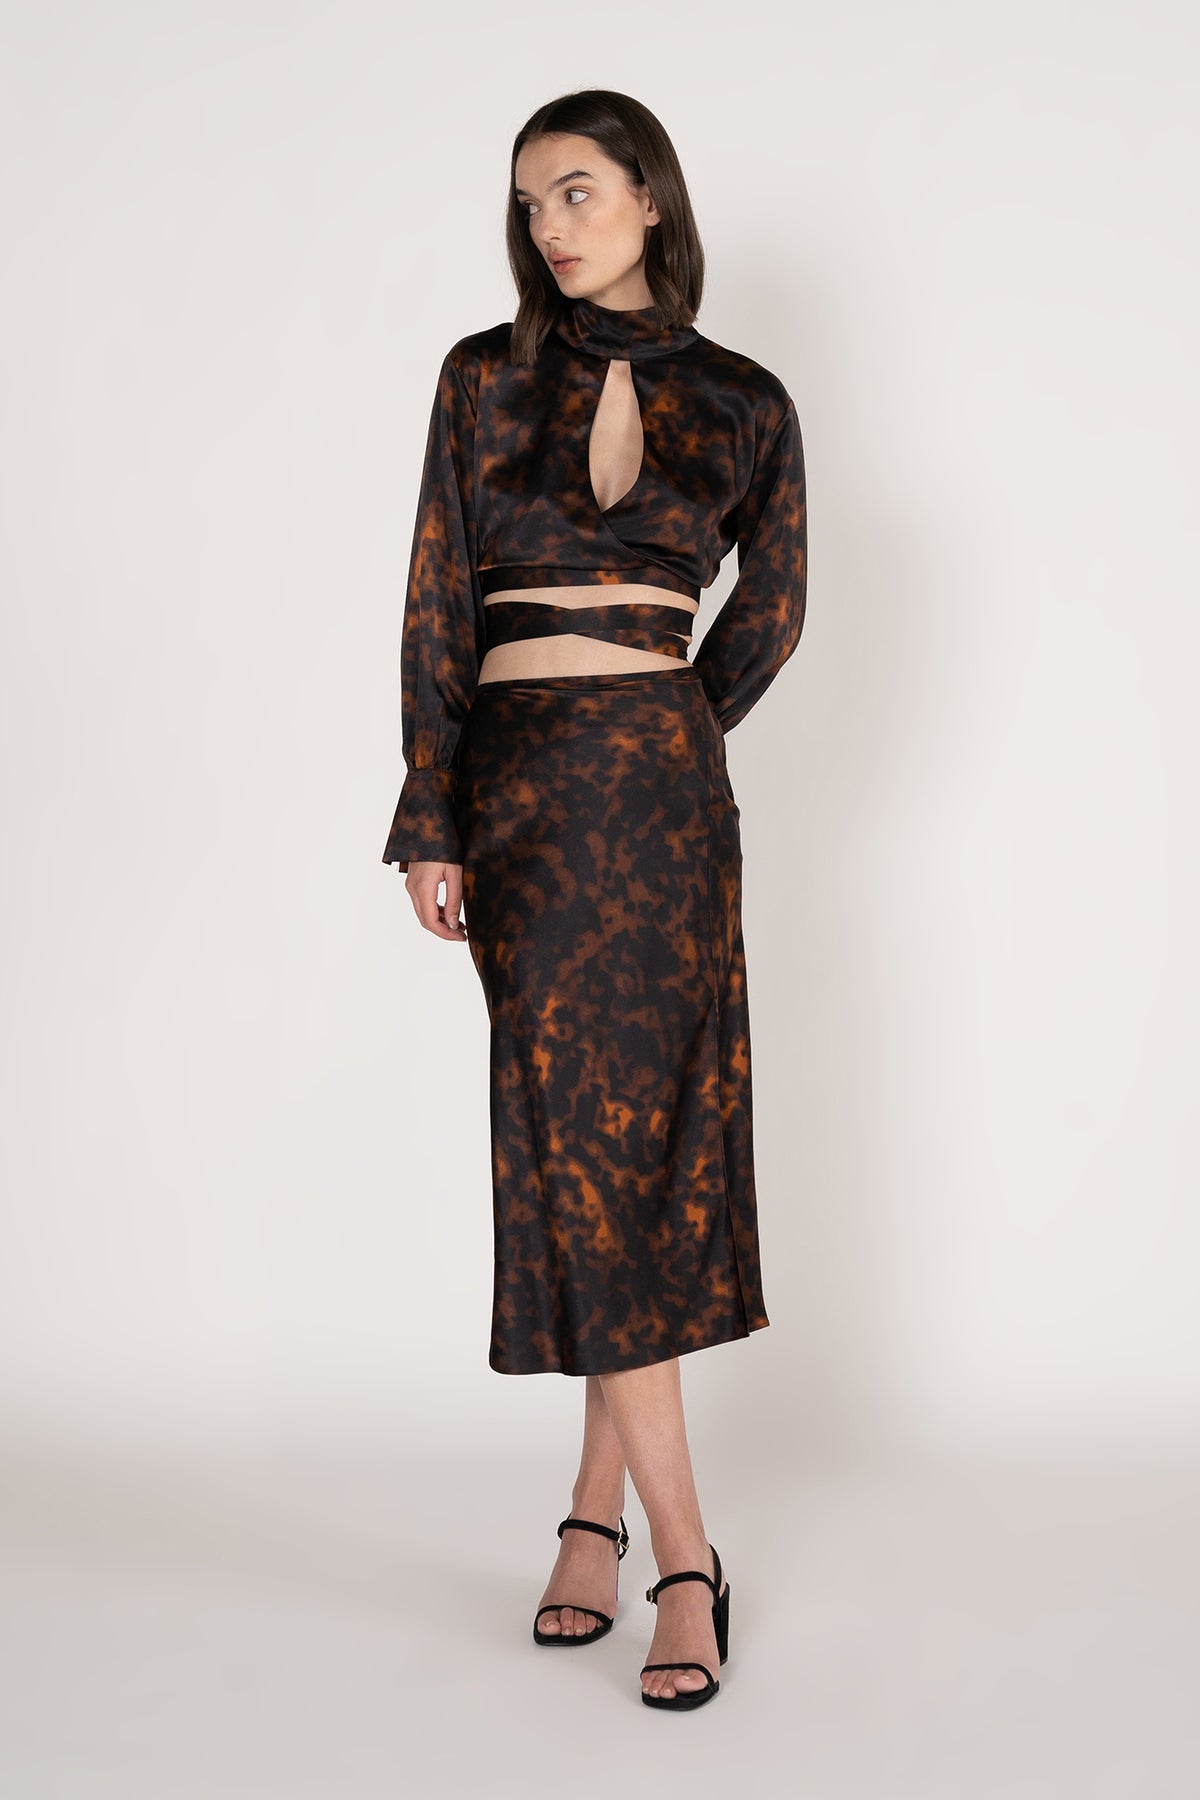 GINIA Thea Slim Line Skirt  in Ember - 100% 19 Momme Silk